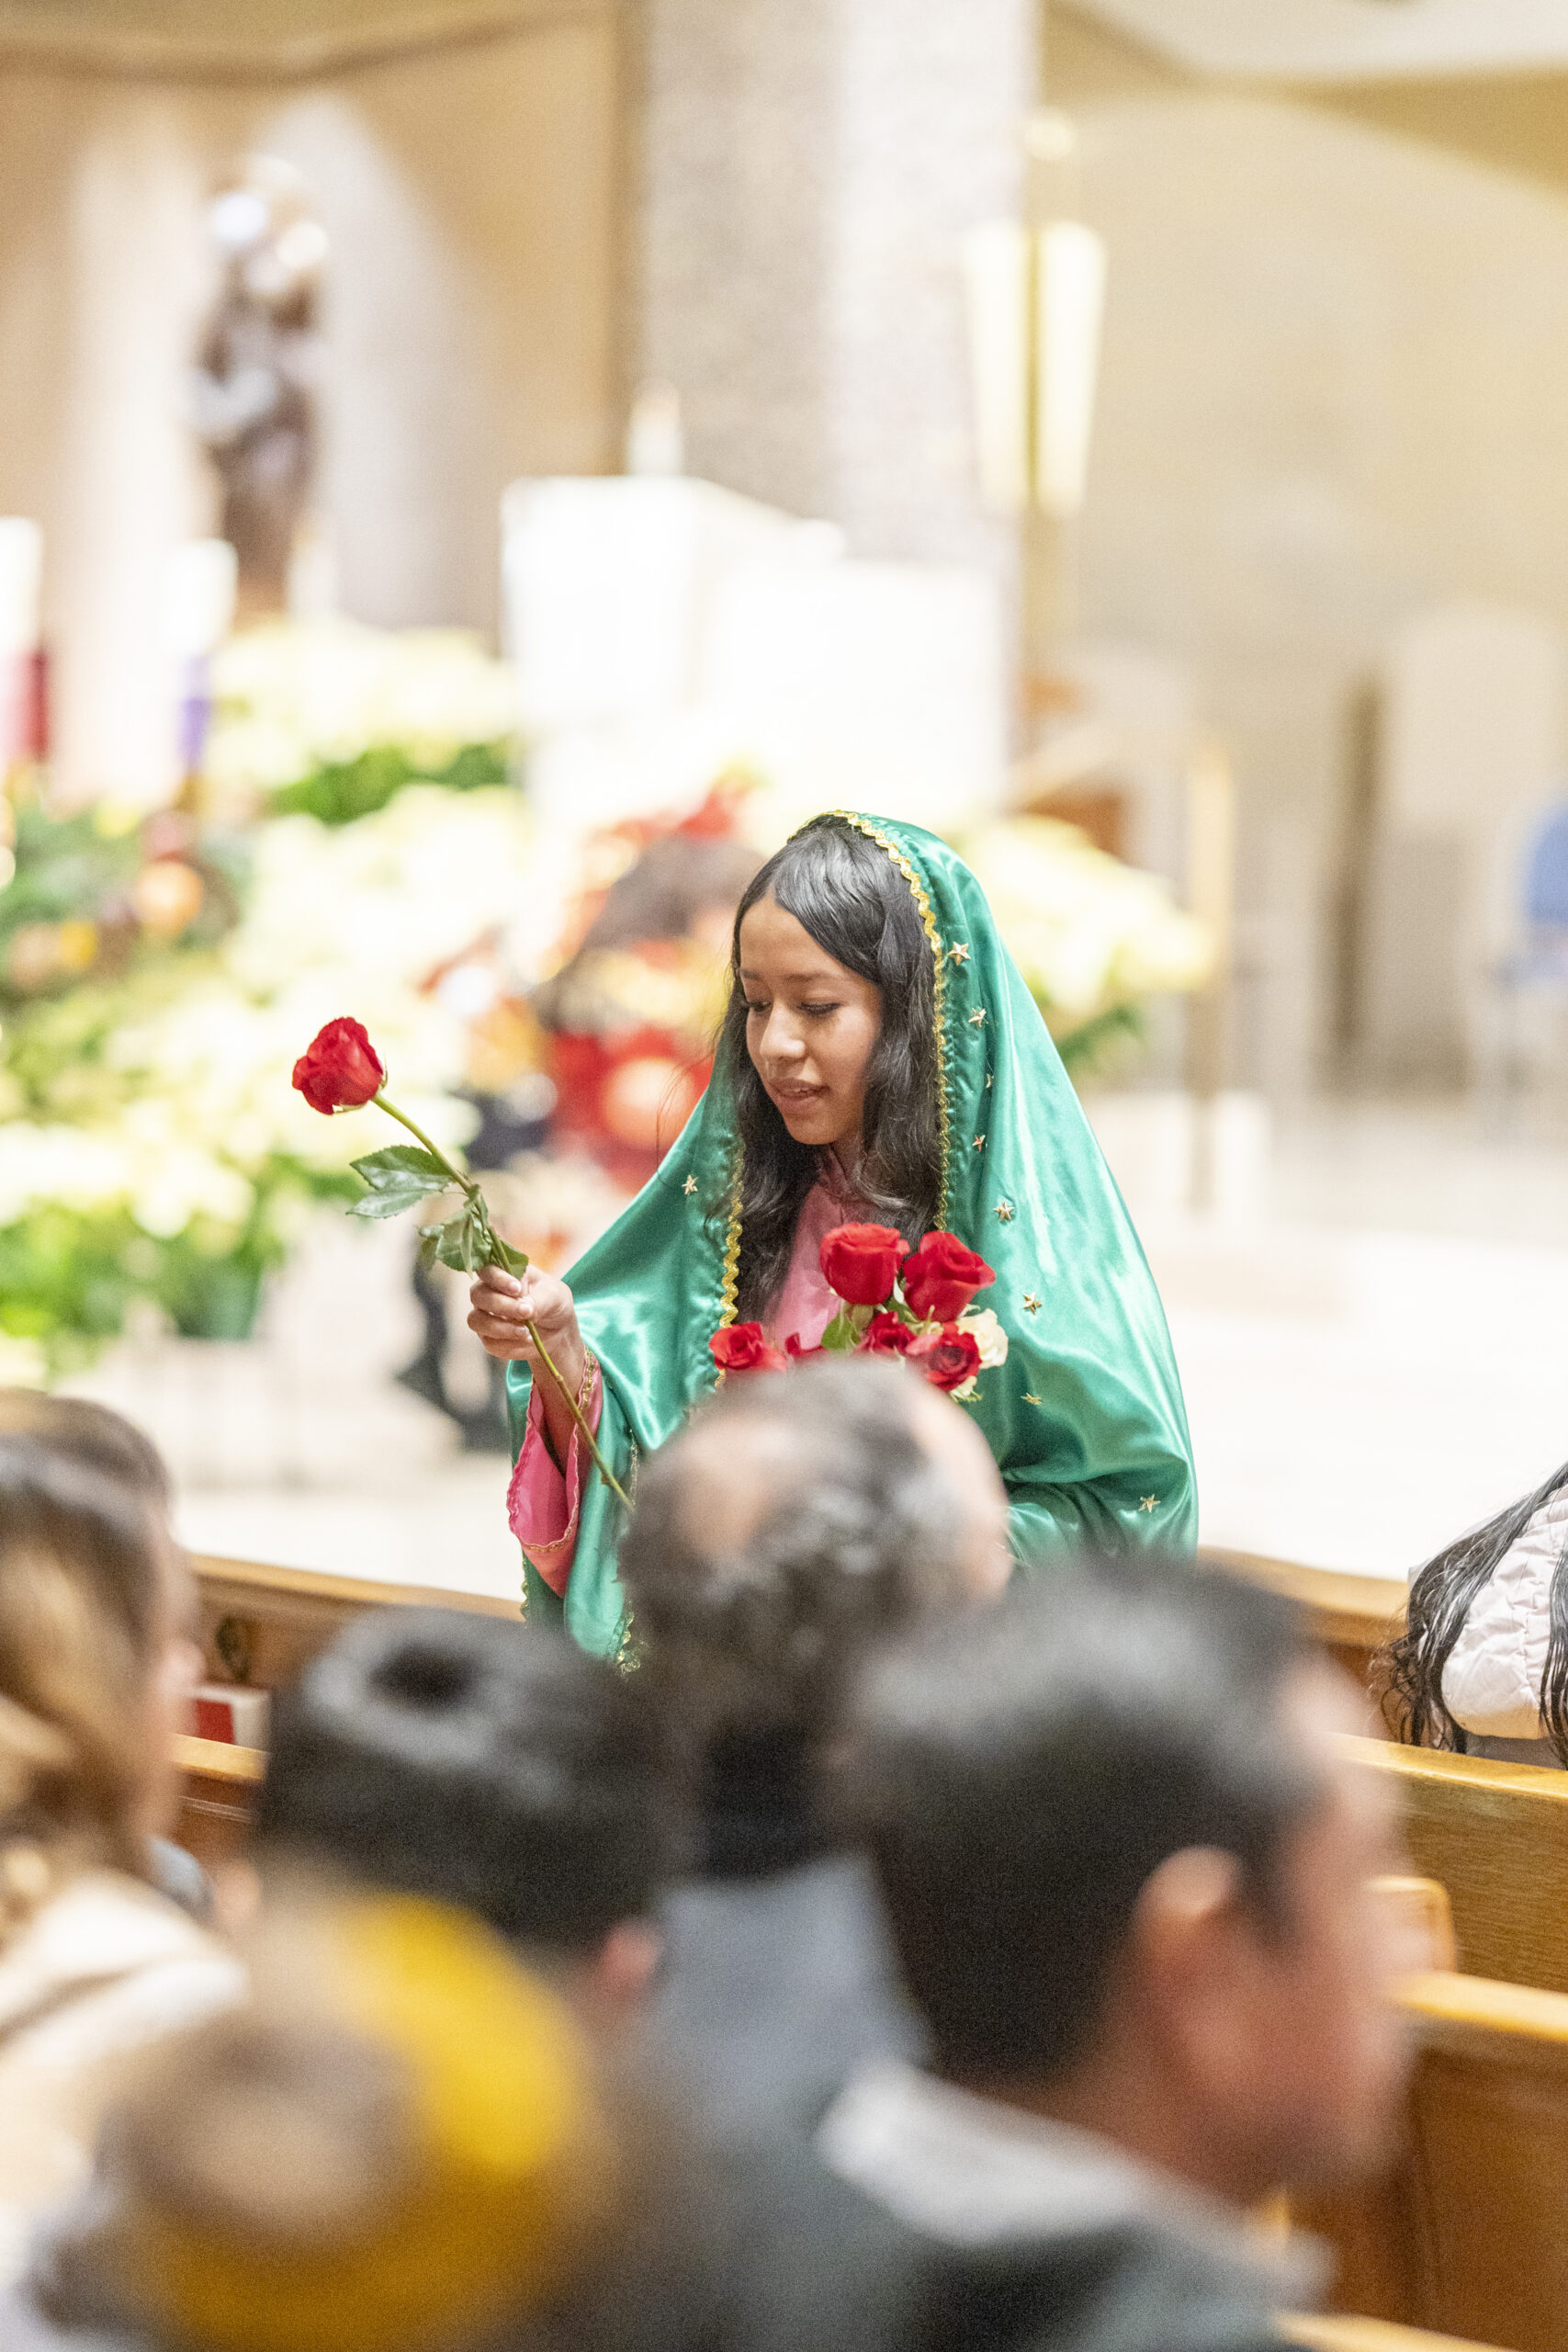 A woman dressed as Our Lady of Guadalupe distributes flowers at the 2023 Mass